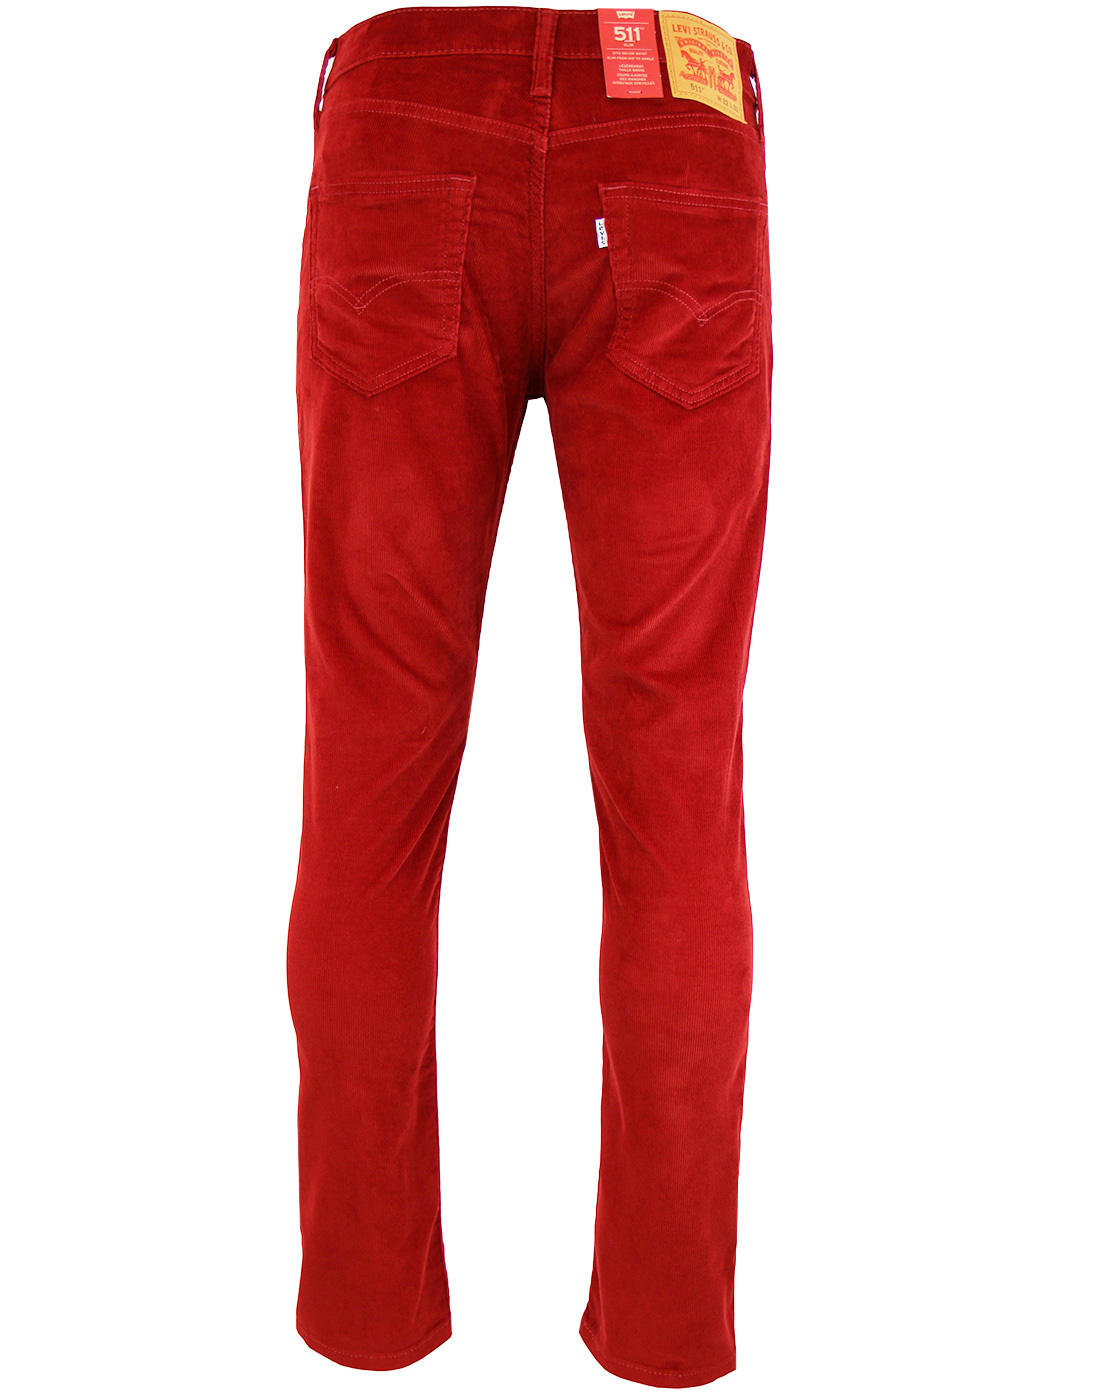 Levis 511 Cords Red 05 